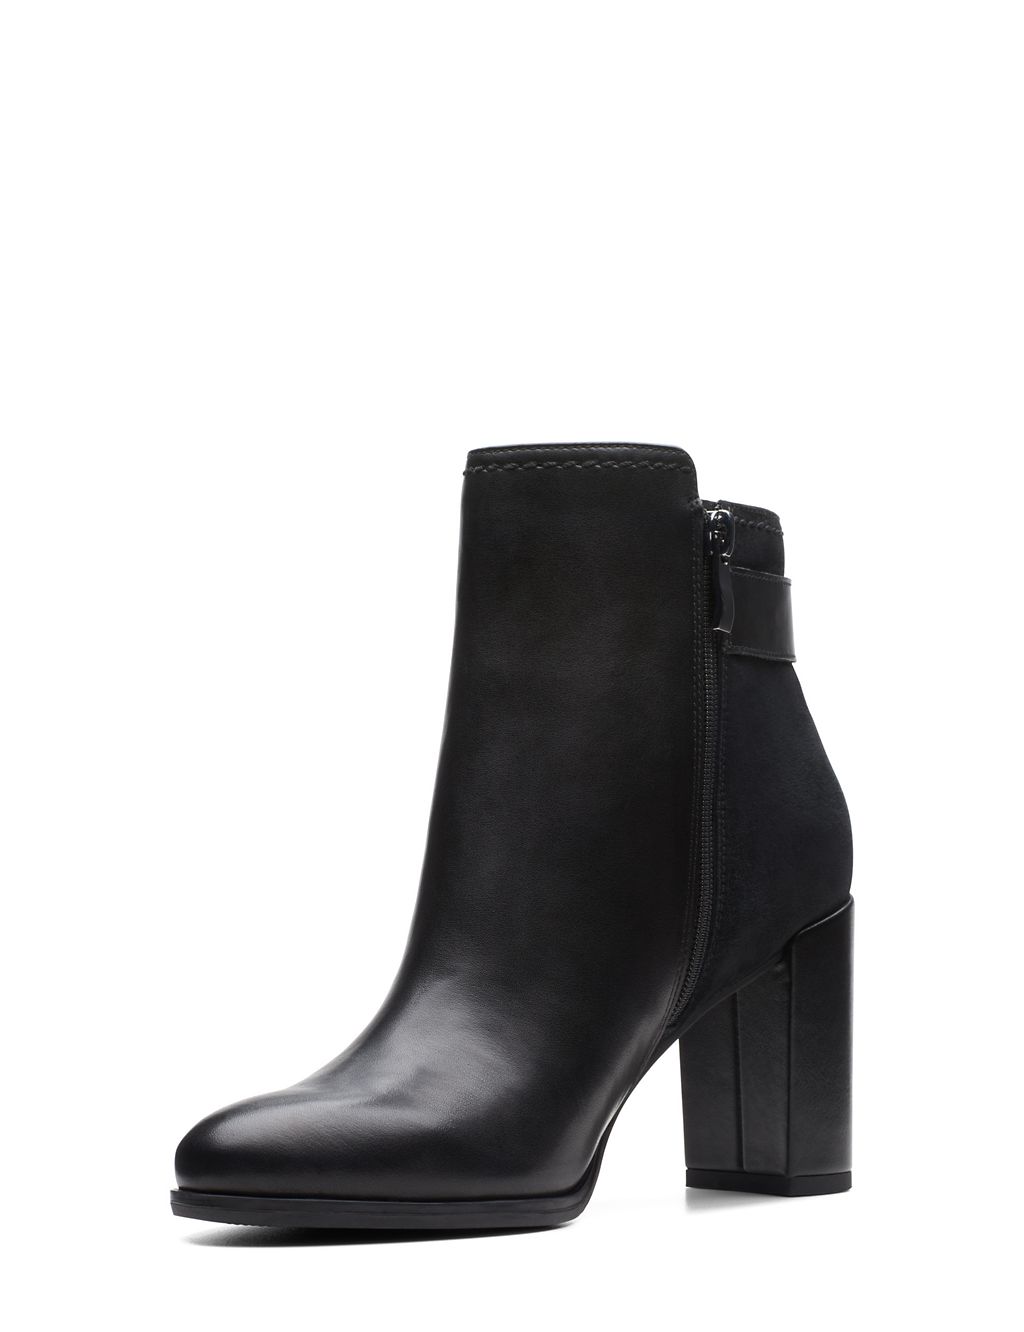 Leather Buckle Block Heel Ankle Boots 6 of 7